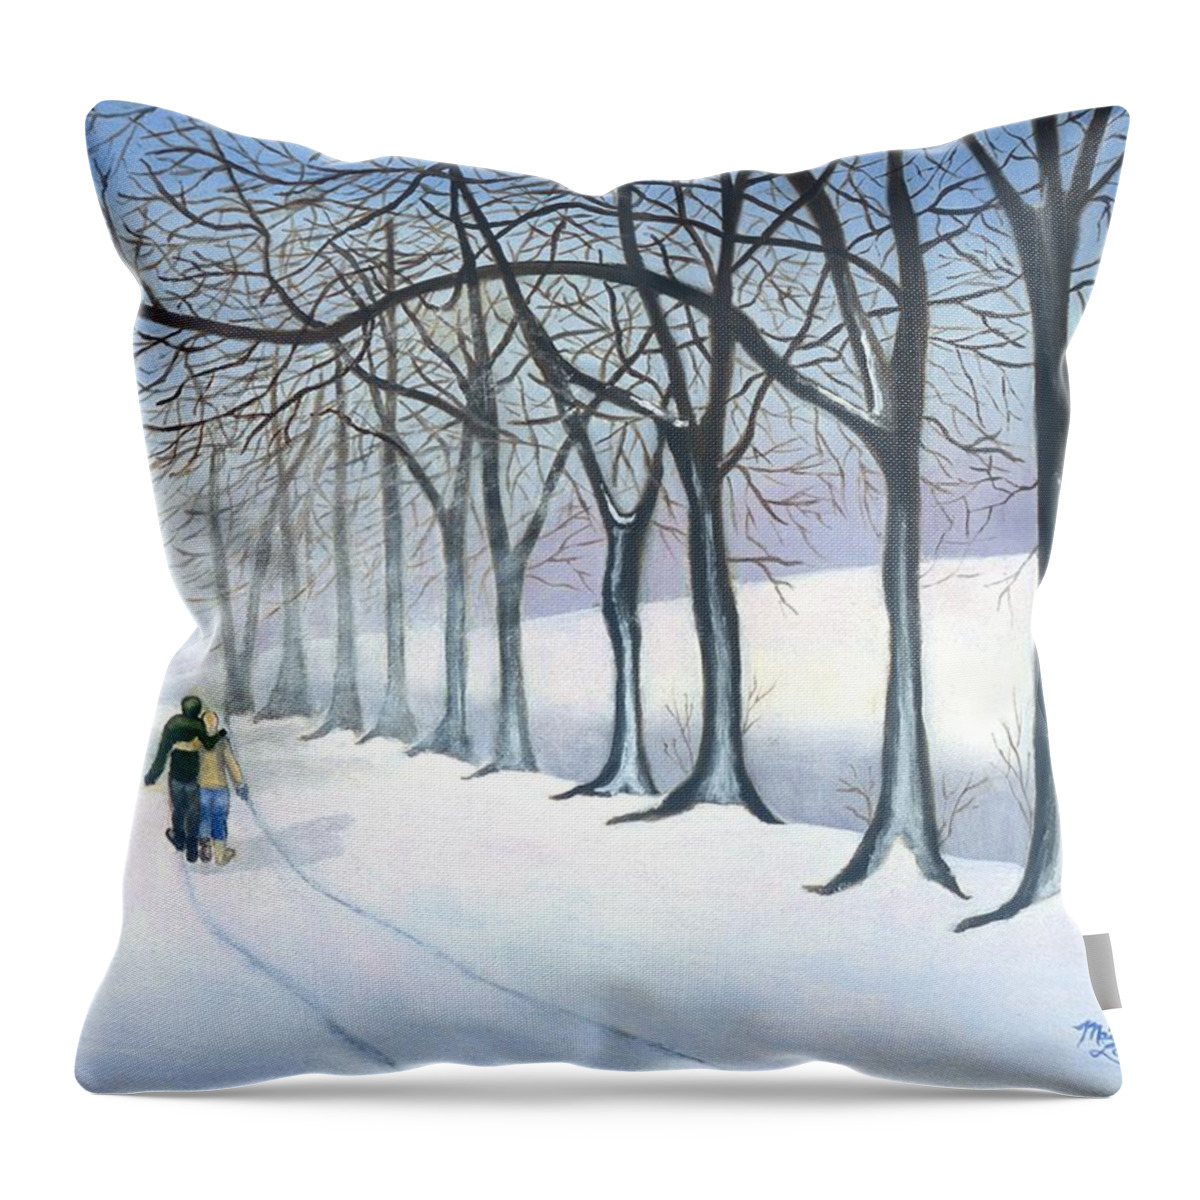 Winter Throw Pillow featuring the painting A Walk In The Snow by Madeline Lovallo